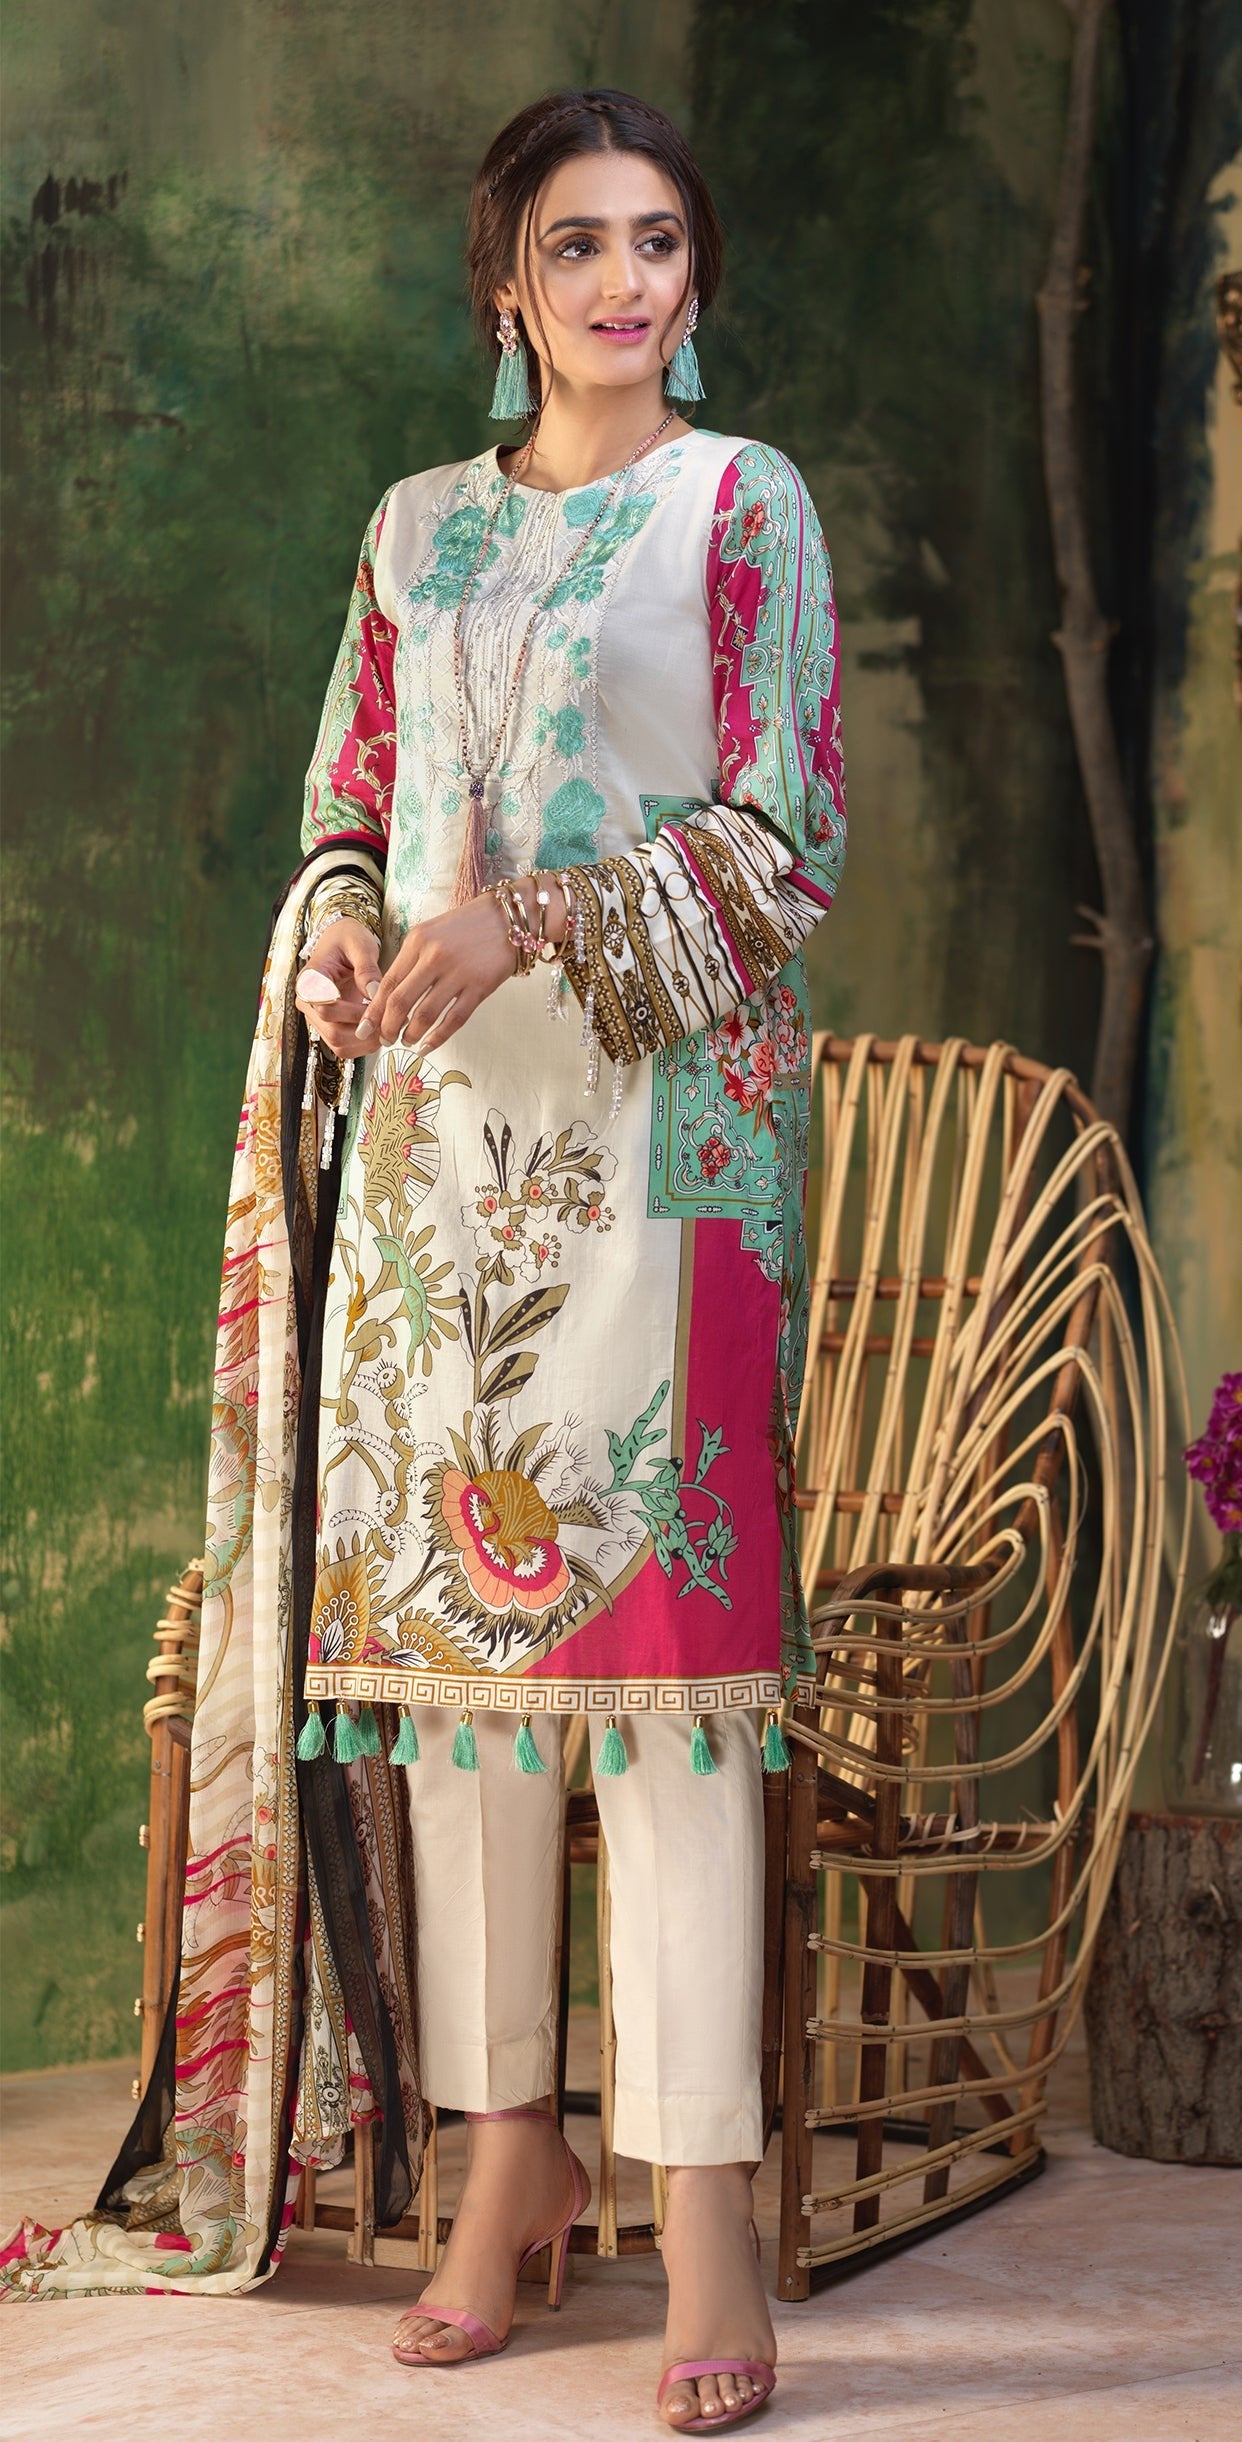 Stitched Printed Lawn Shirt with Embroidered Front , Printed Chiffon Dupatta & Cambric Trouser I Z'ure 3pc (WK-317A) - SalitexOnline